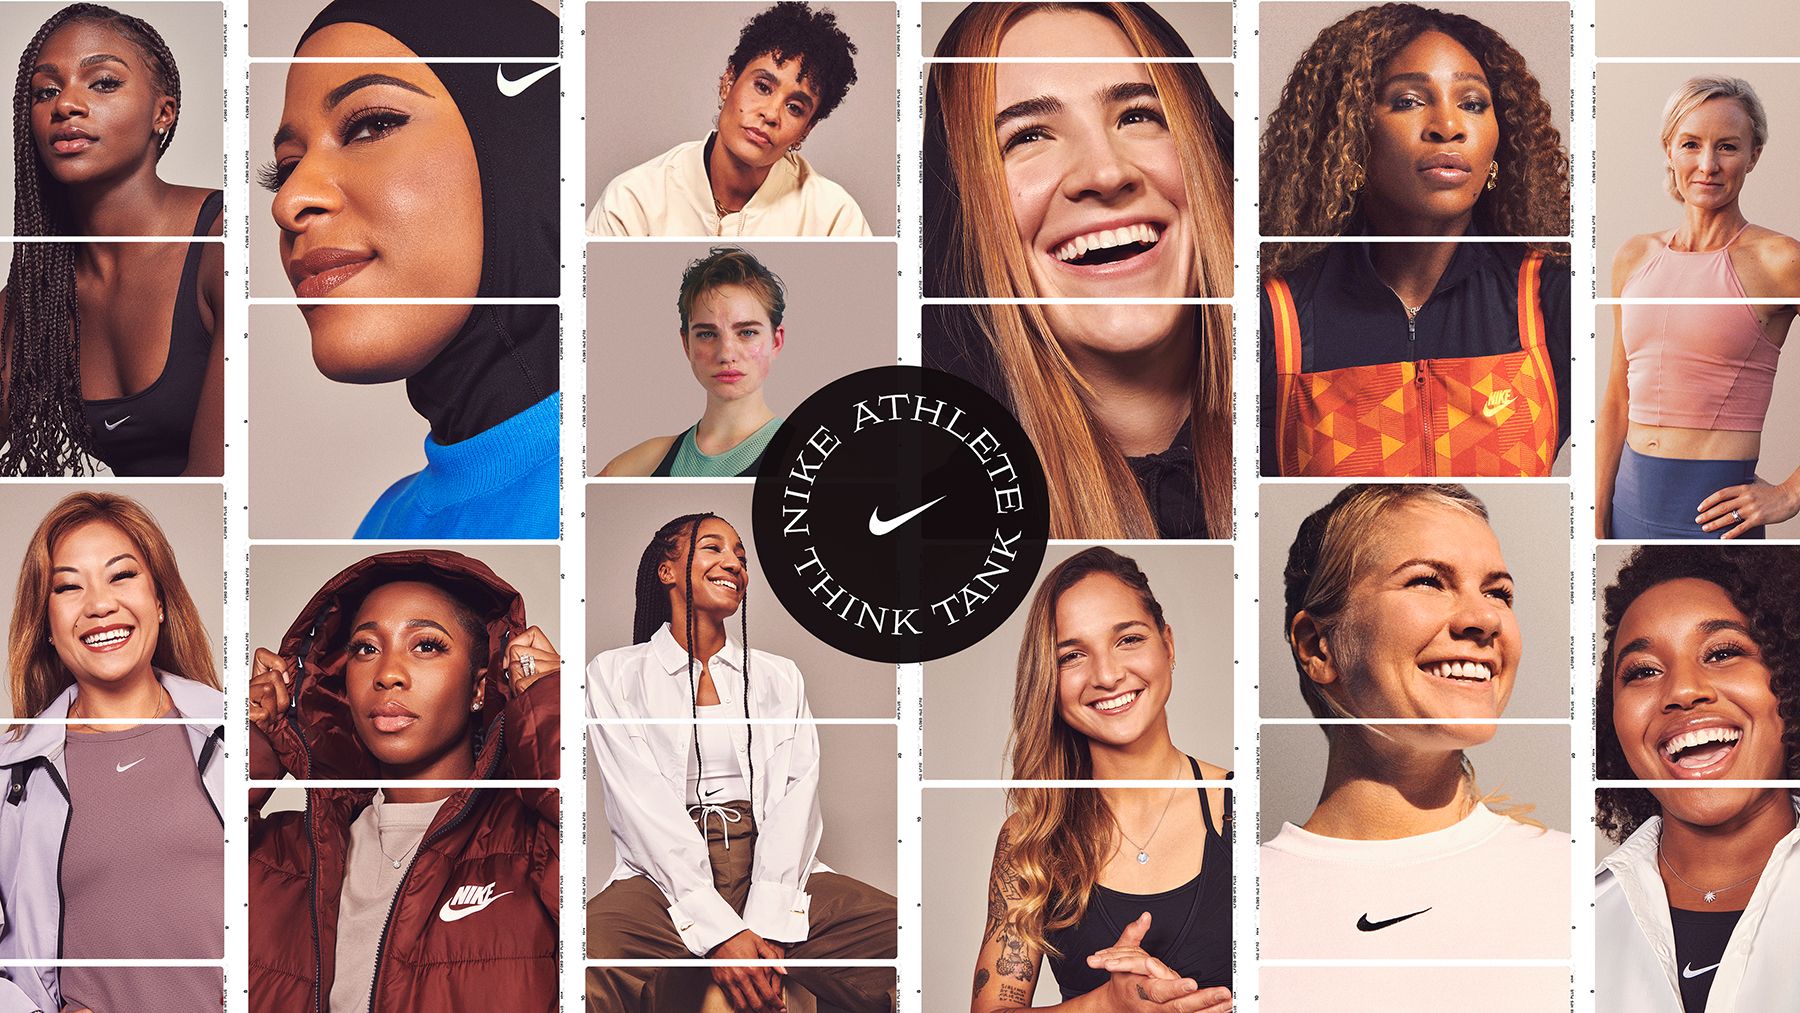 Nike Partners with 13 Women Athletes to Bring Equality to Sports